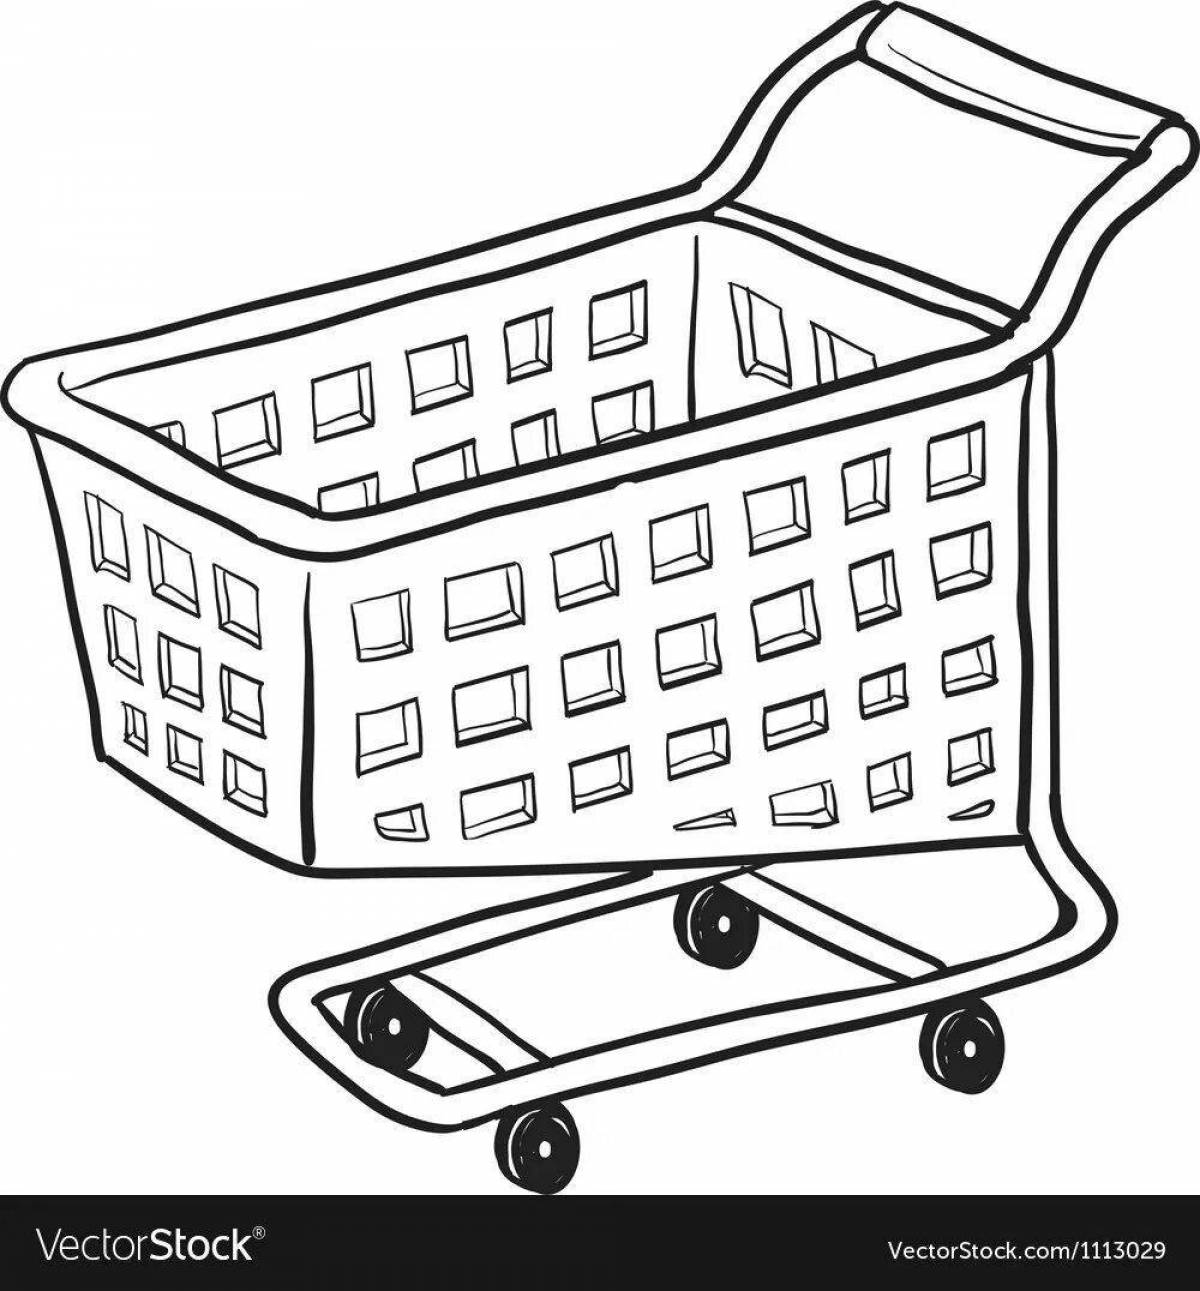 Sparkling grocery basket coloring page